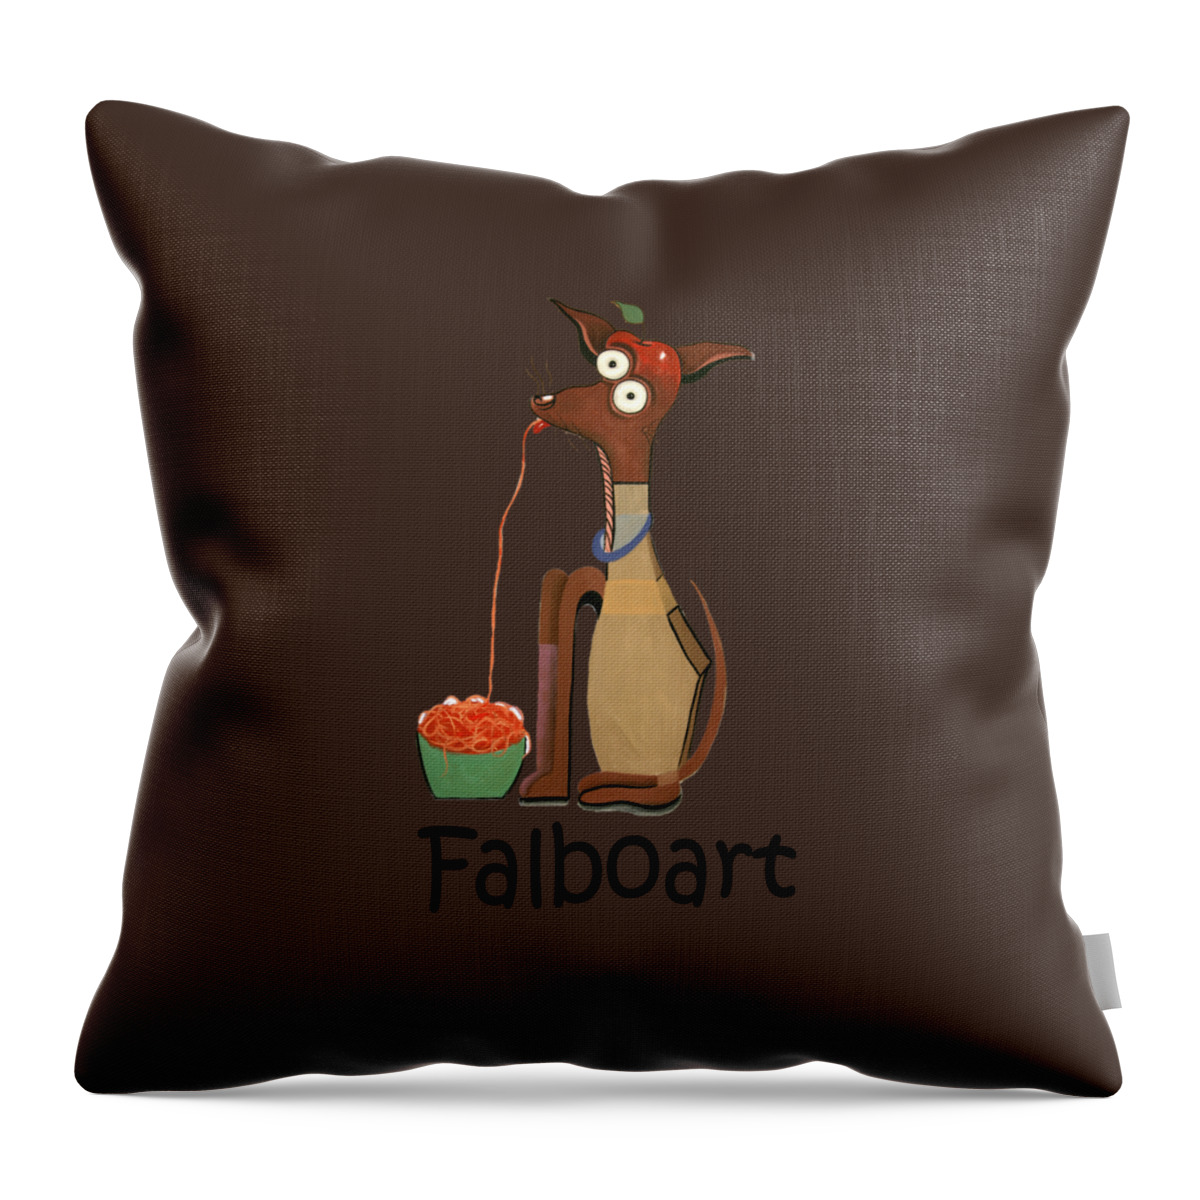 My Apple Head Chiwawa T-shirt.dog T-shirt Throw Pillow featuring the painting My Applehead Chiwawa by Anthony Falbo